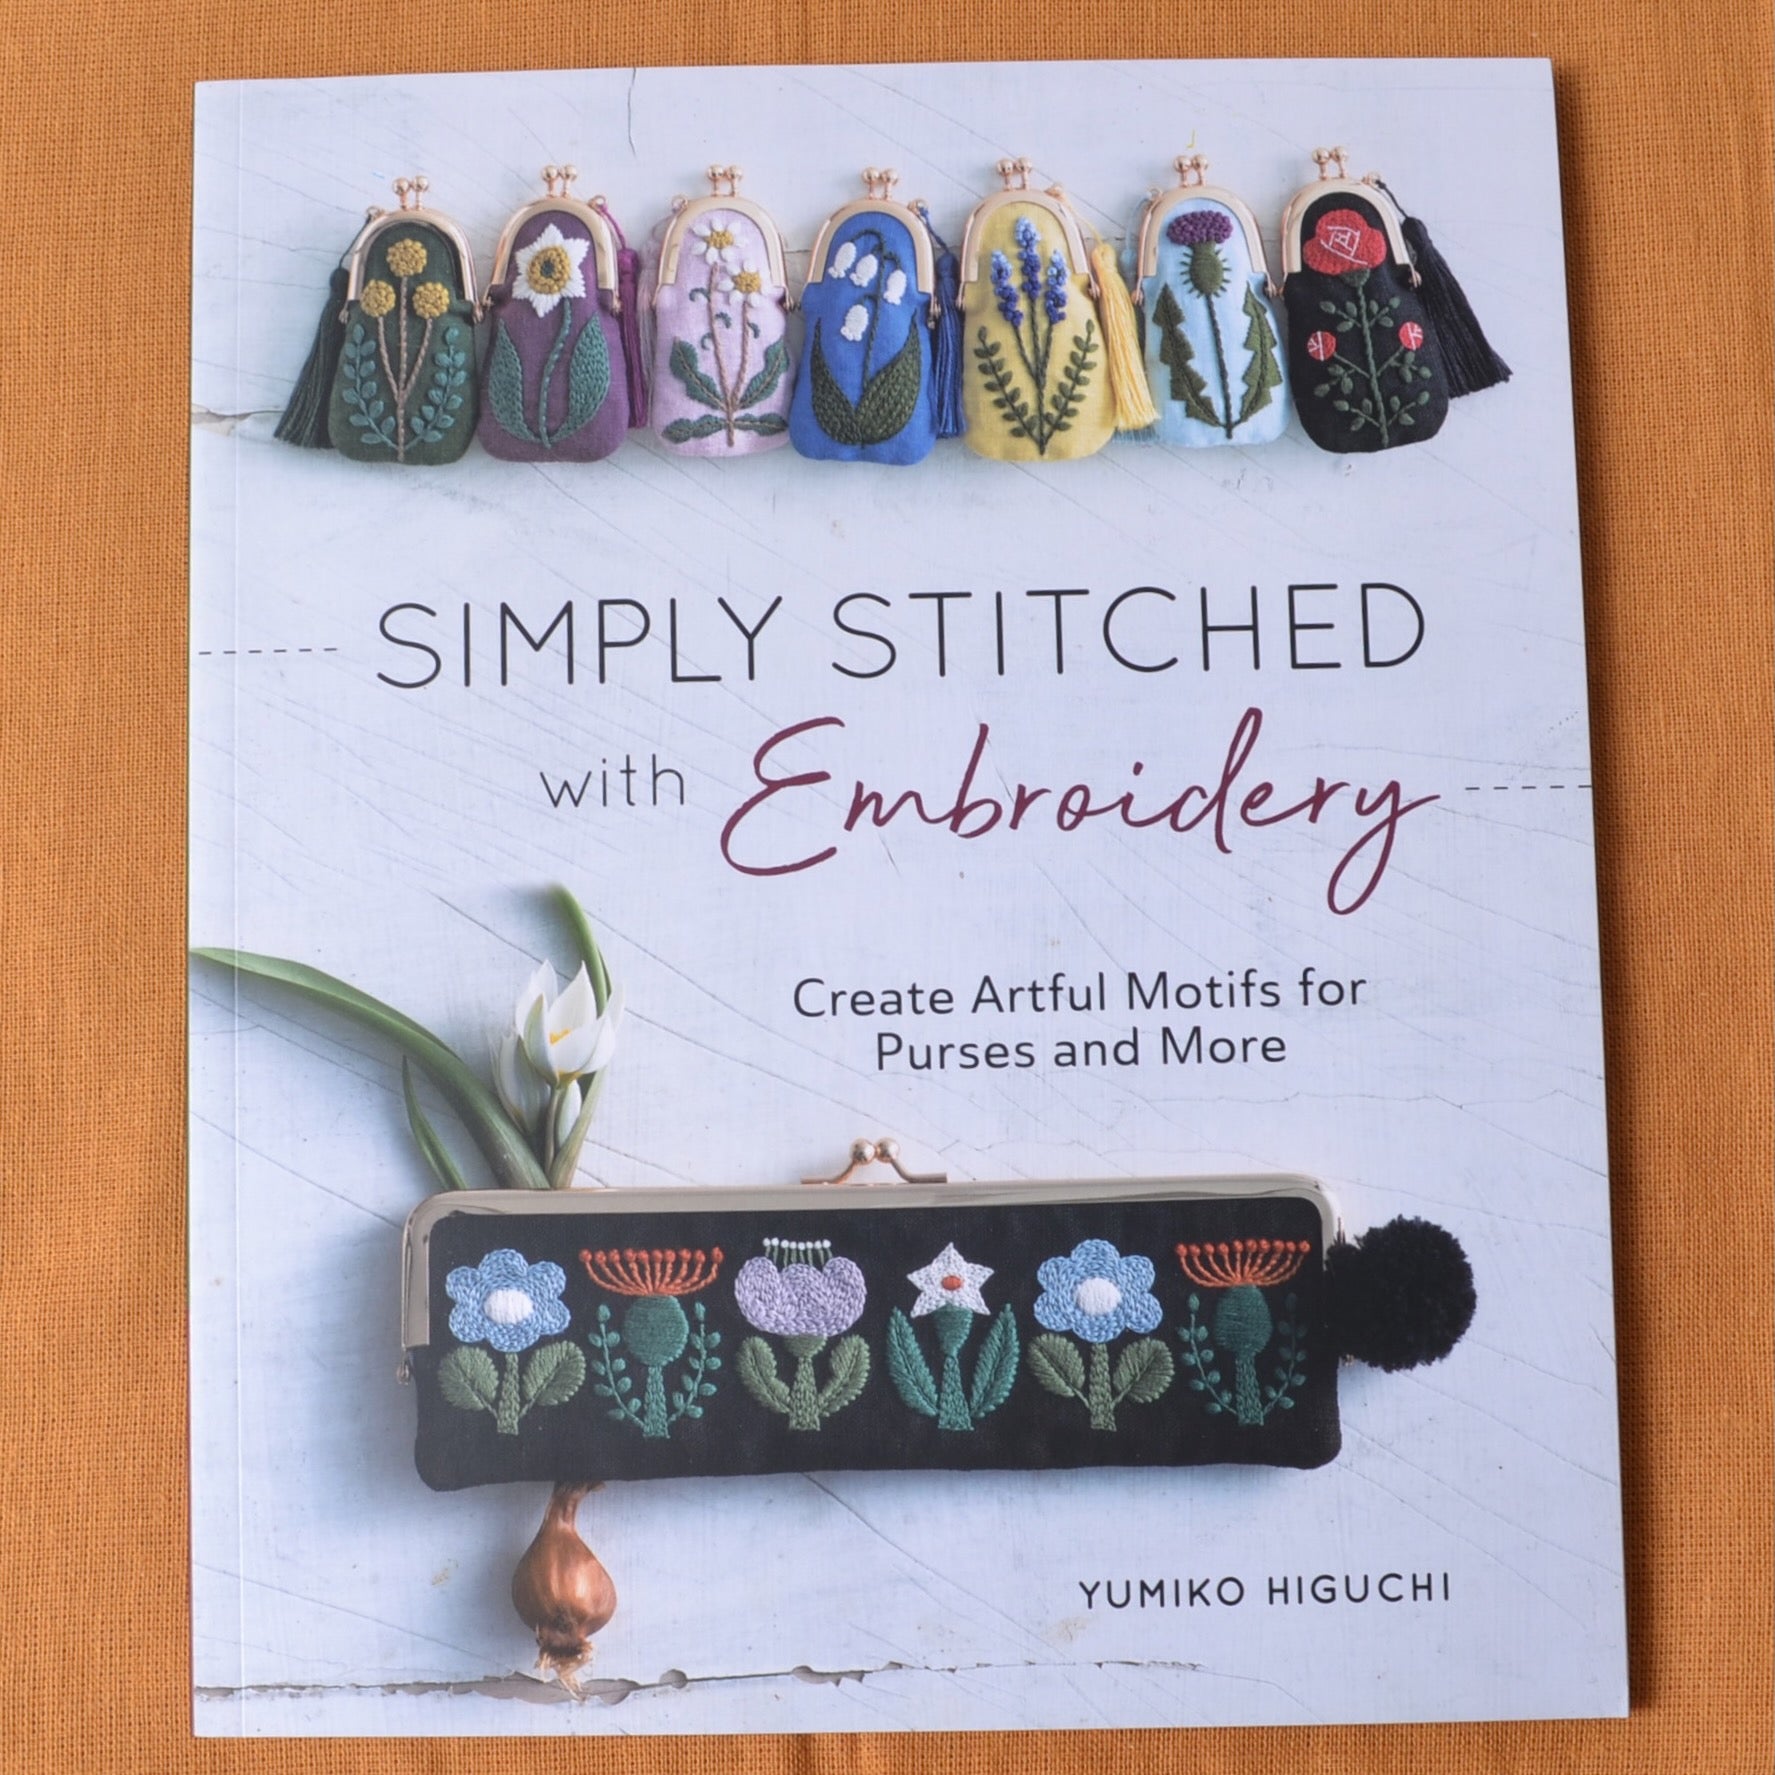 Simply Stitched with Embroidery by Yumiko Higuchi